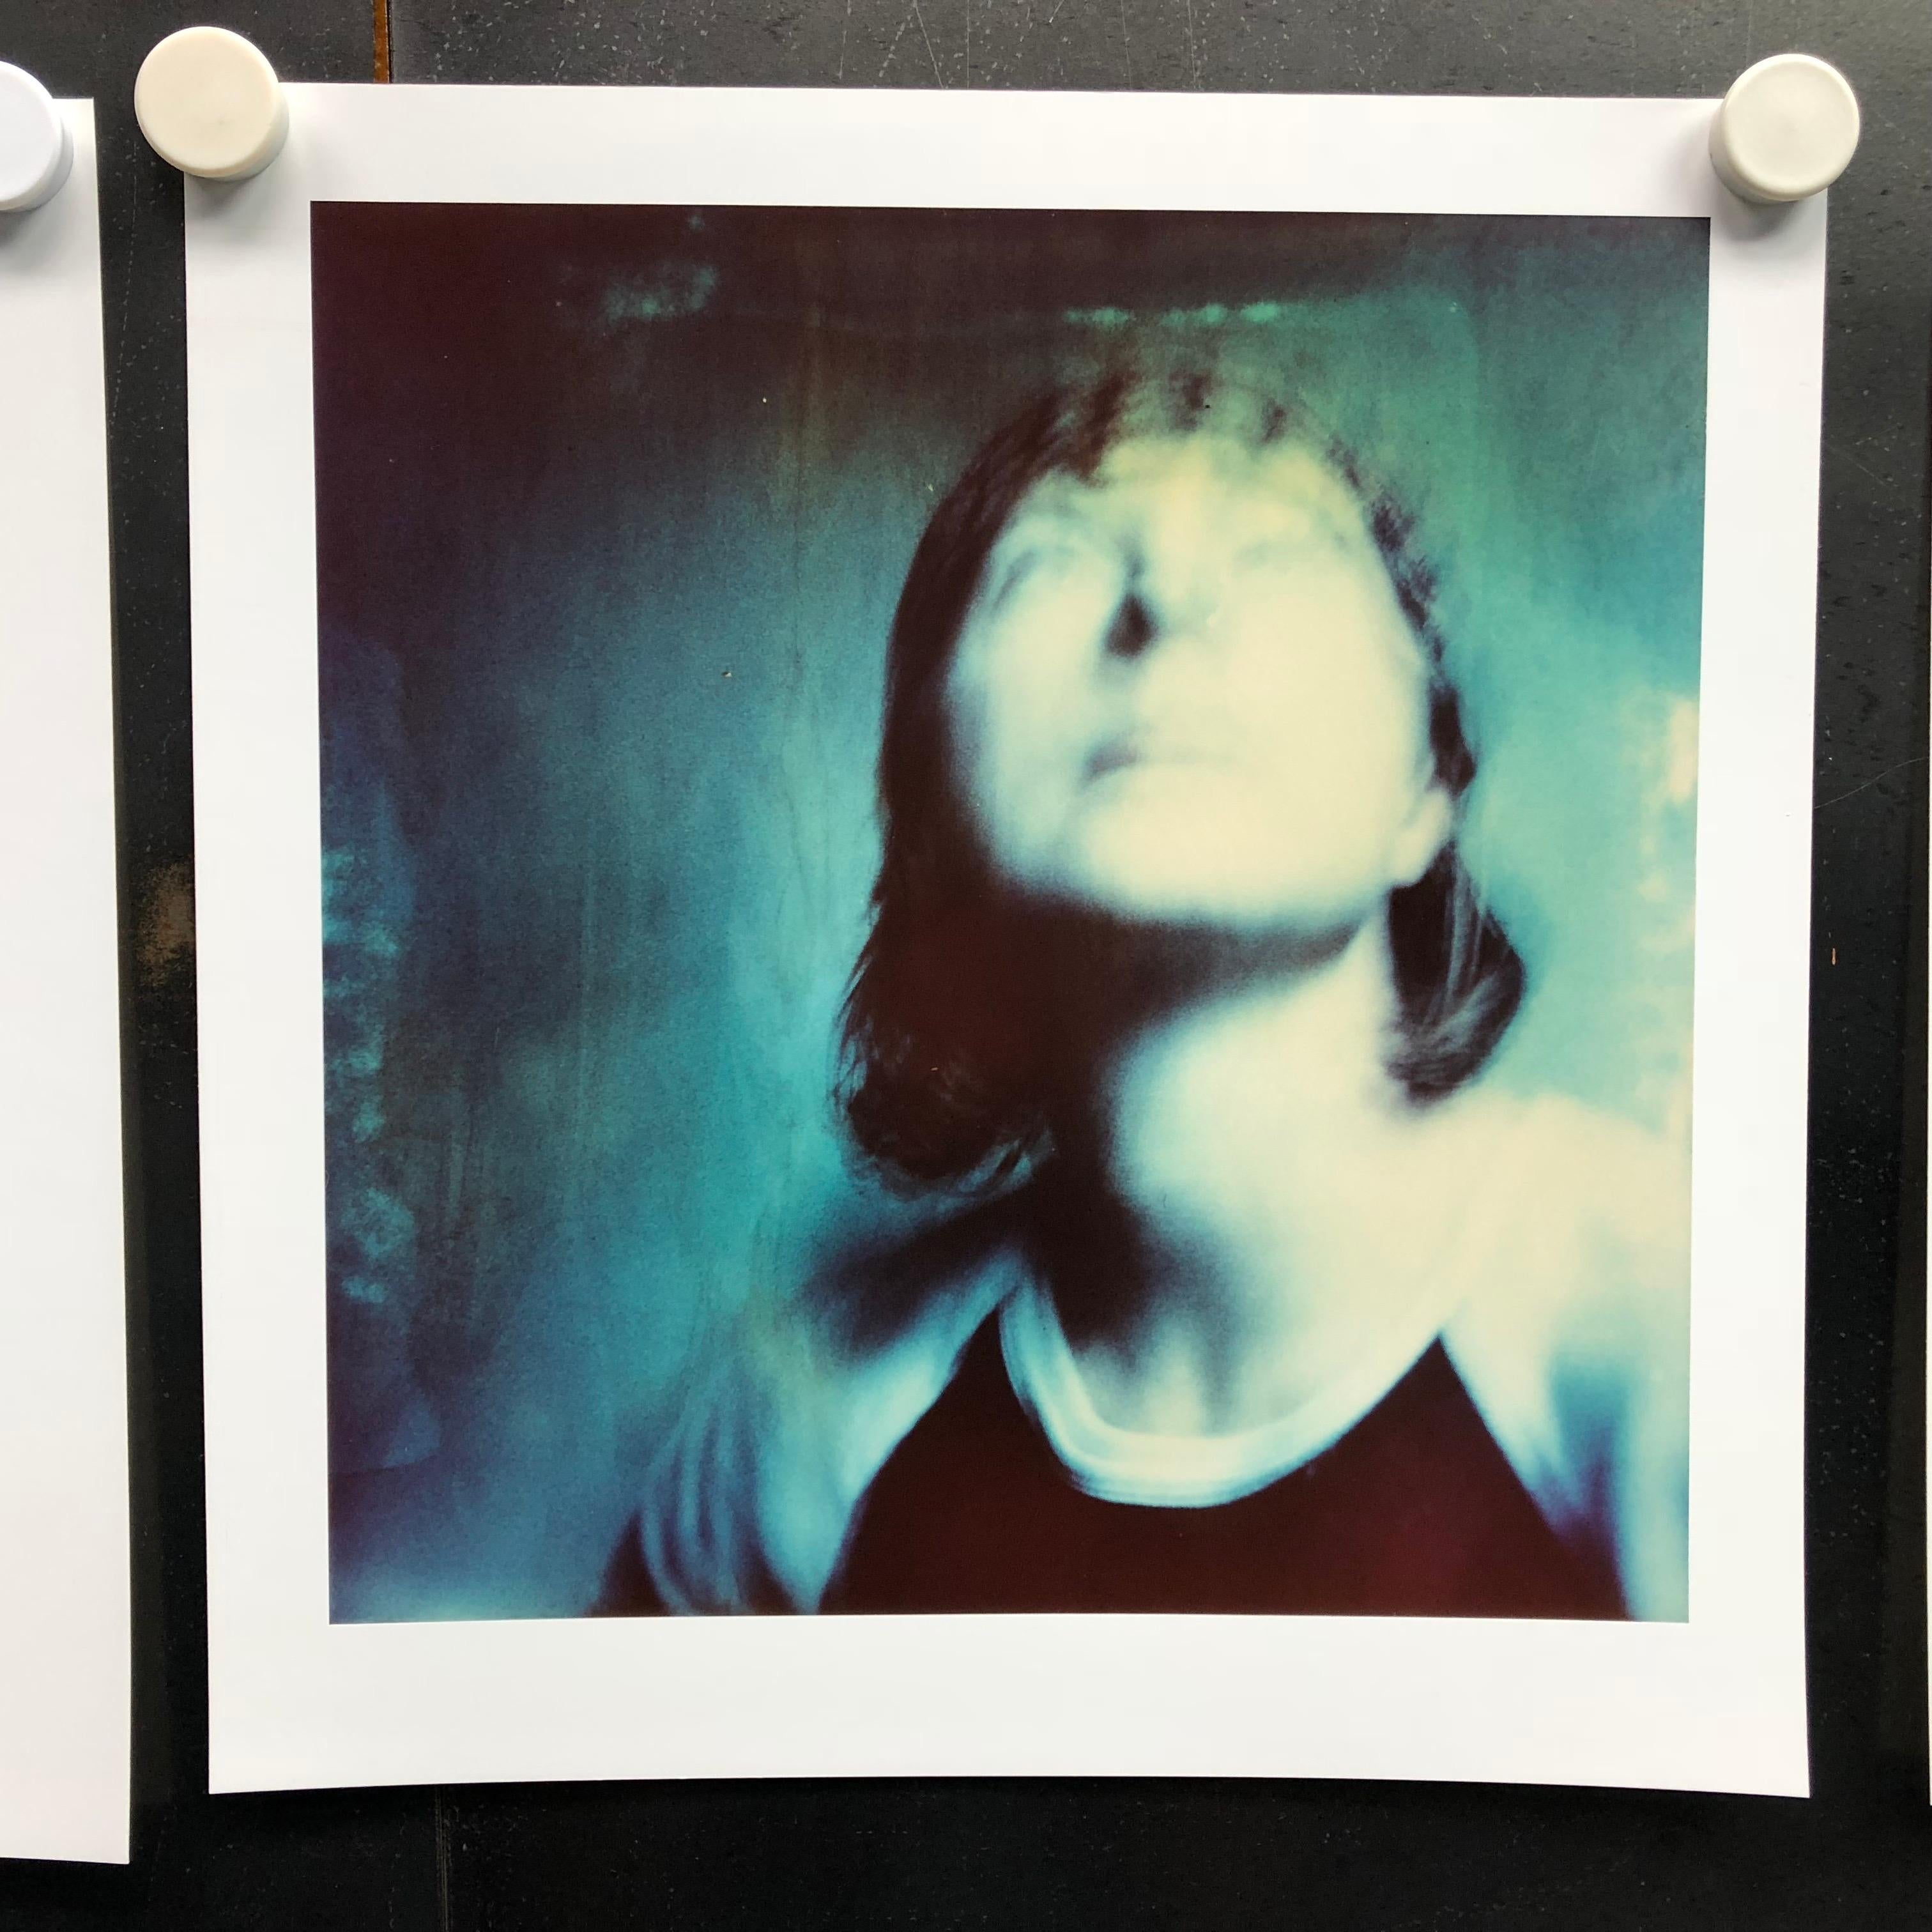 'Max Blue', triptych (The Last Picture Show), 2005, 
each 38x36cm, 38x122cm installed, Edition 1/5, 
3 analog C-Prints, hand-printed by the artist on Fuji Crystal Achive Paper, matte finish, 
based on three SX-70 Polaroids, Certificate and signature